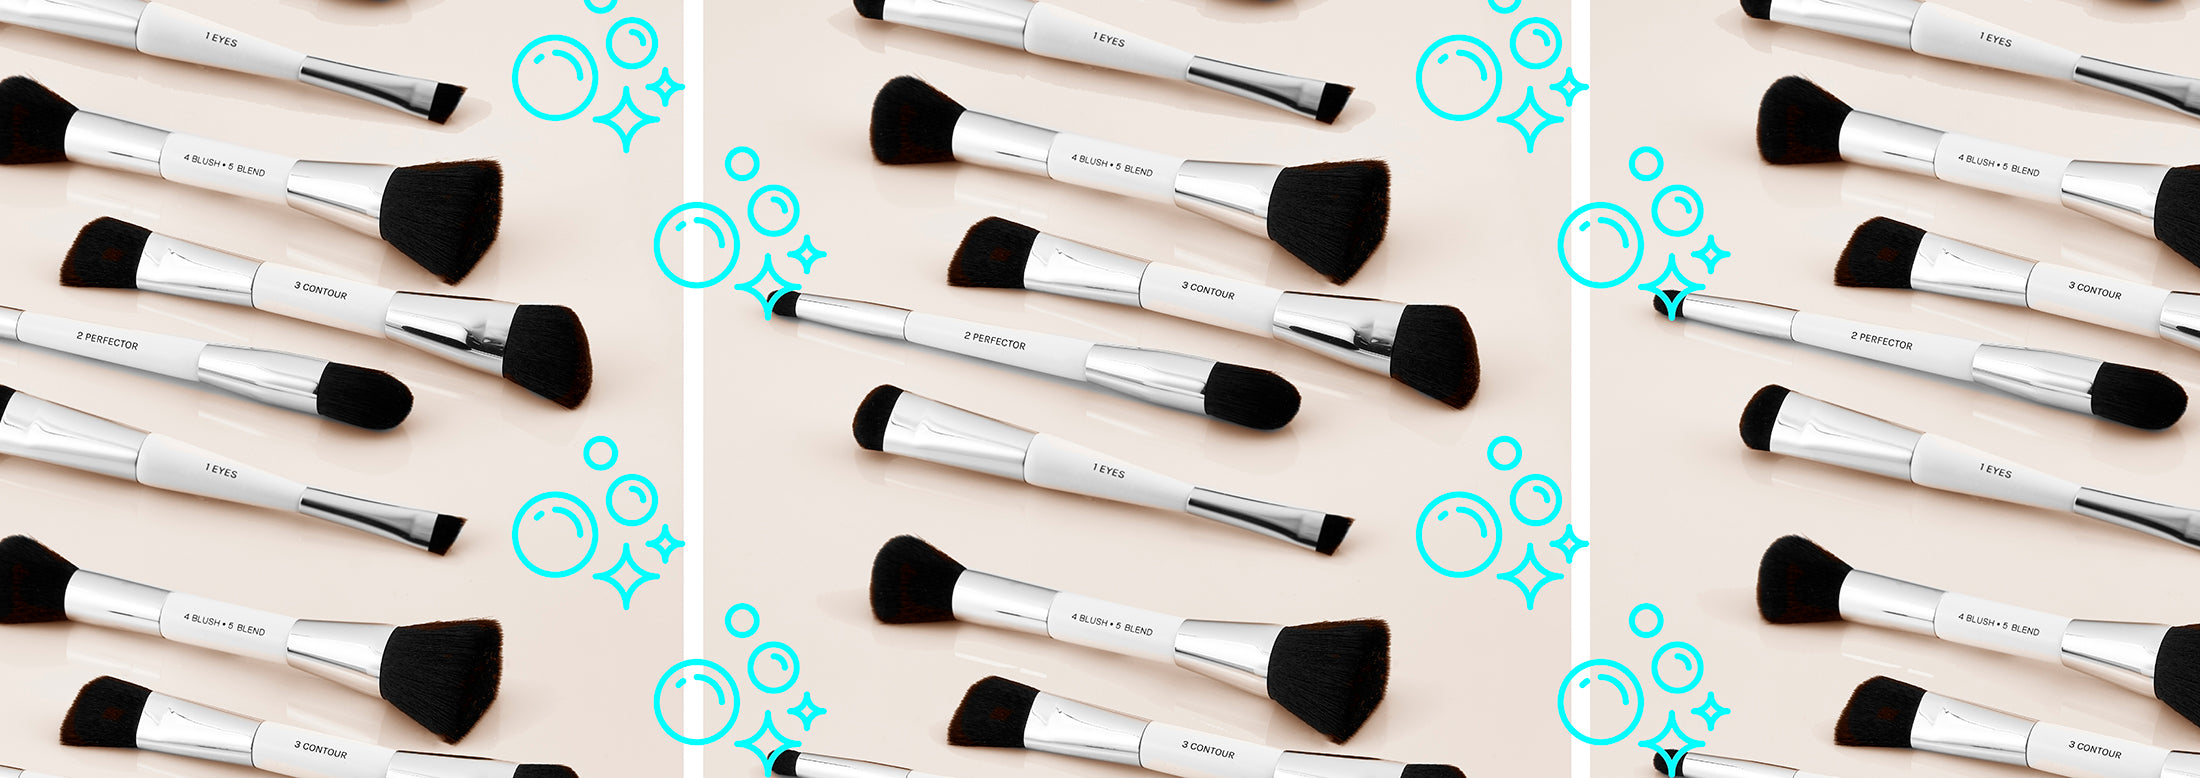 The essential makeup brushes in front of a bubble and pink background